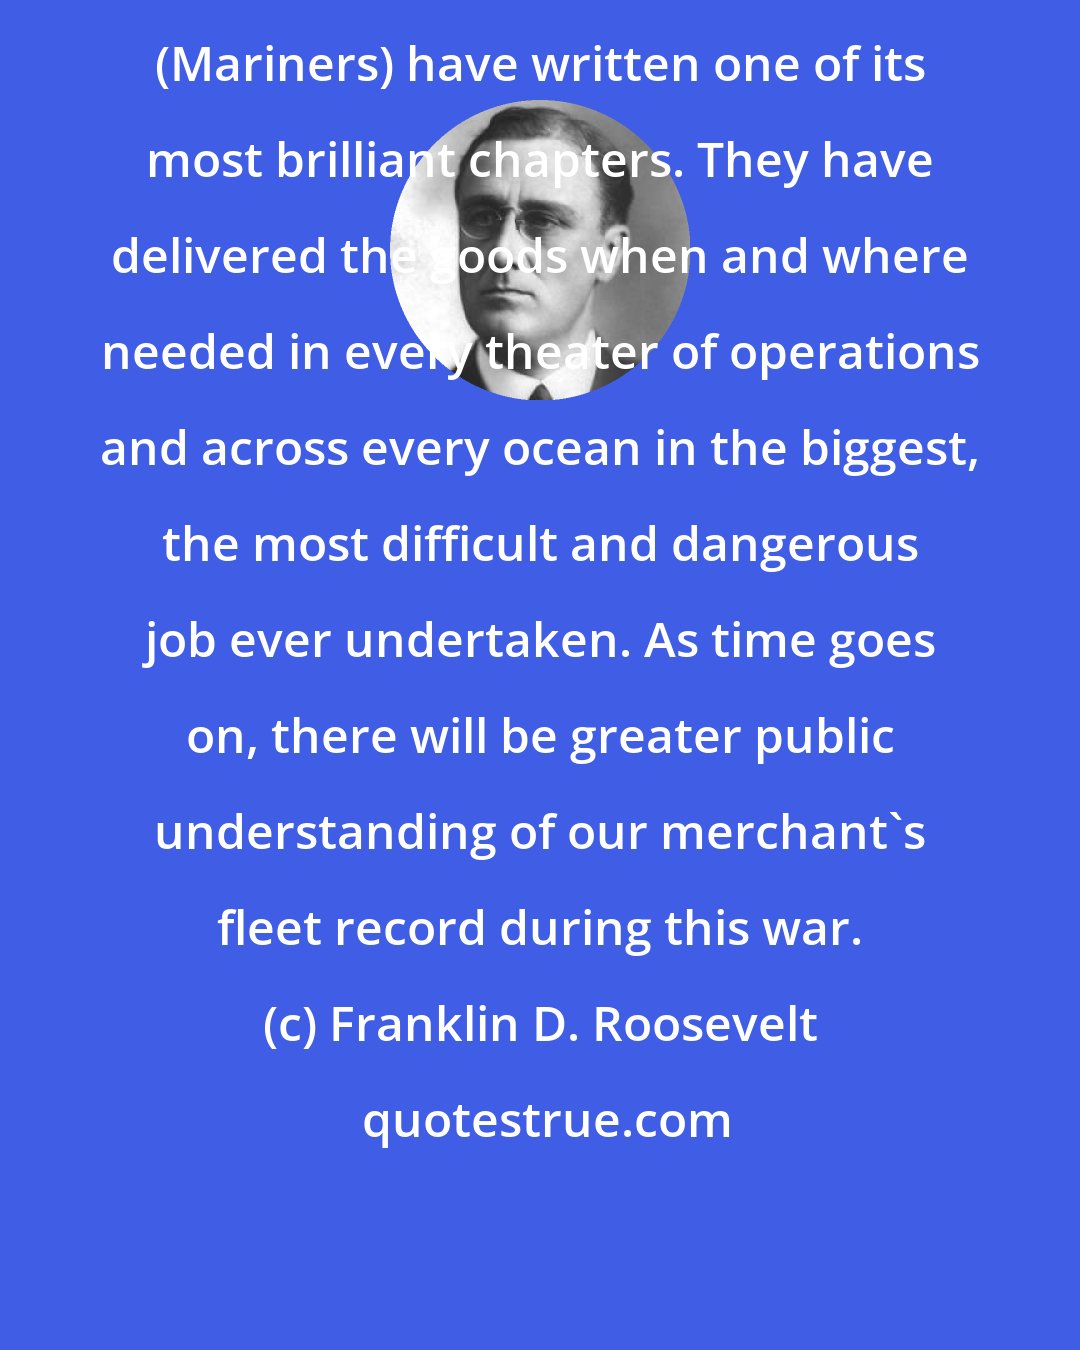 Franklin D. Roosevelt: (Mariners) have written one of its most brilliant chapters. They have delivered the goods when and where needed in every theater of operations and across every ocean in the biggest, the most difficult and dangerous job ever undertaken. As time goes on, there will be greater public understanding of our merchant's fleet record during this war.